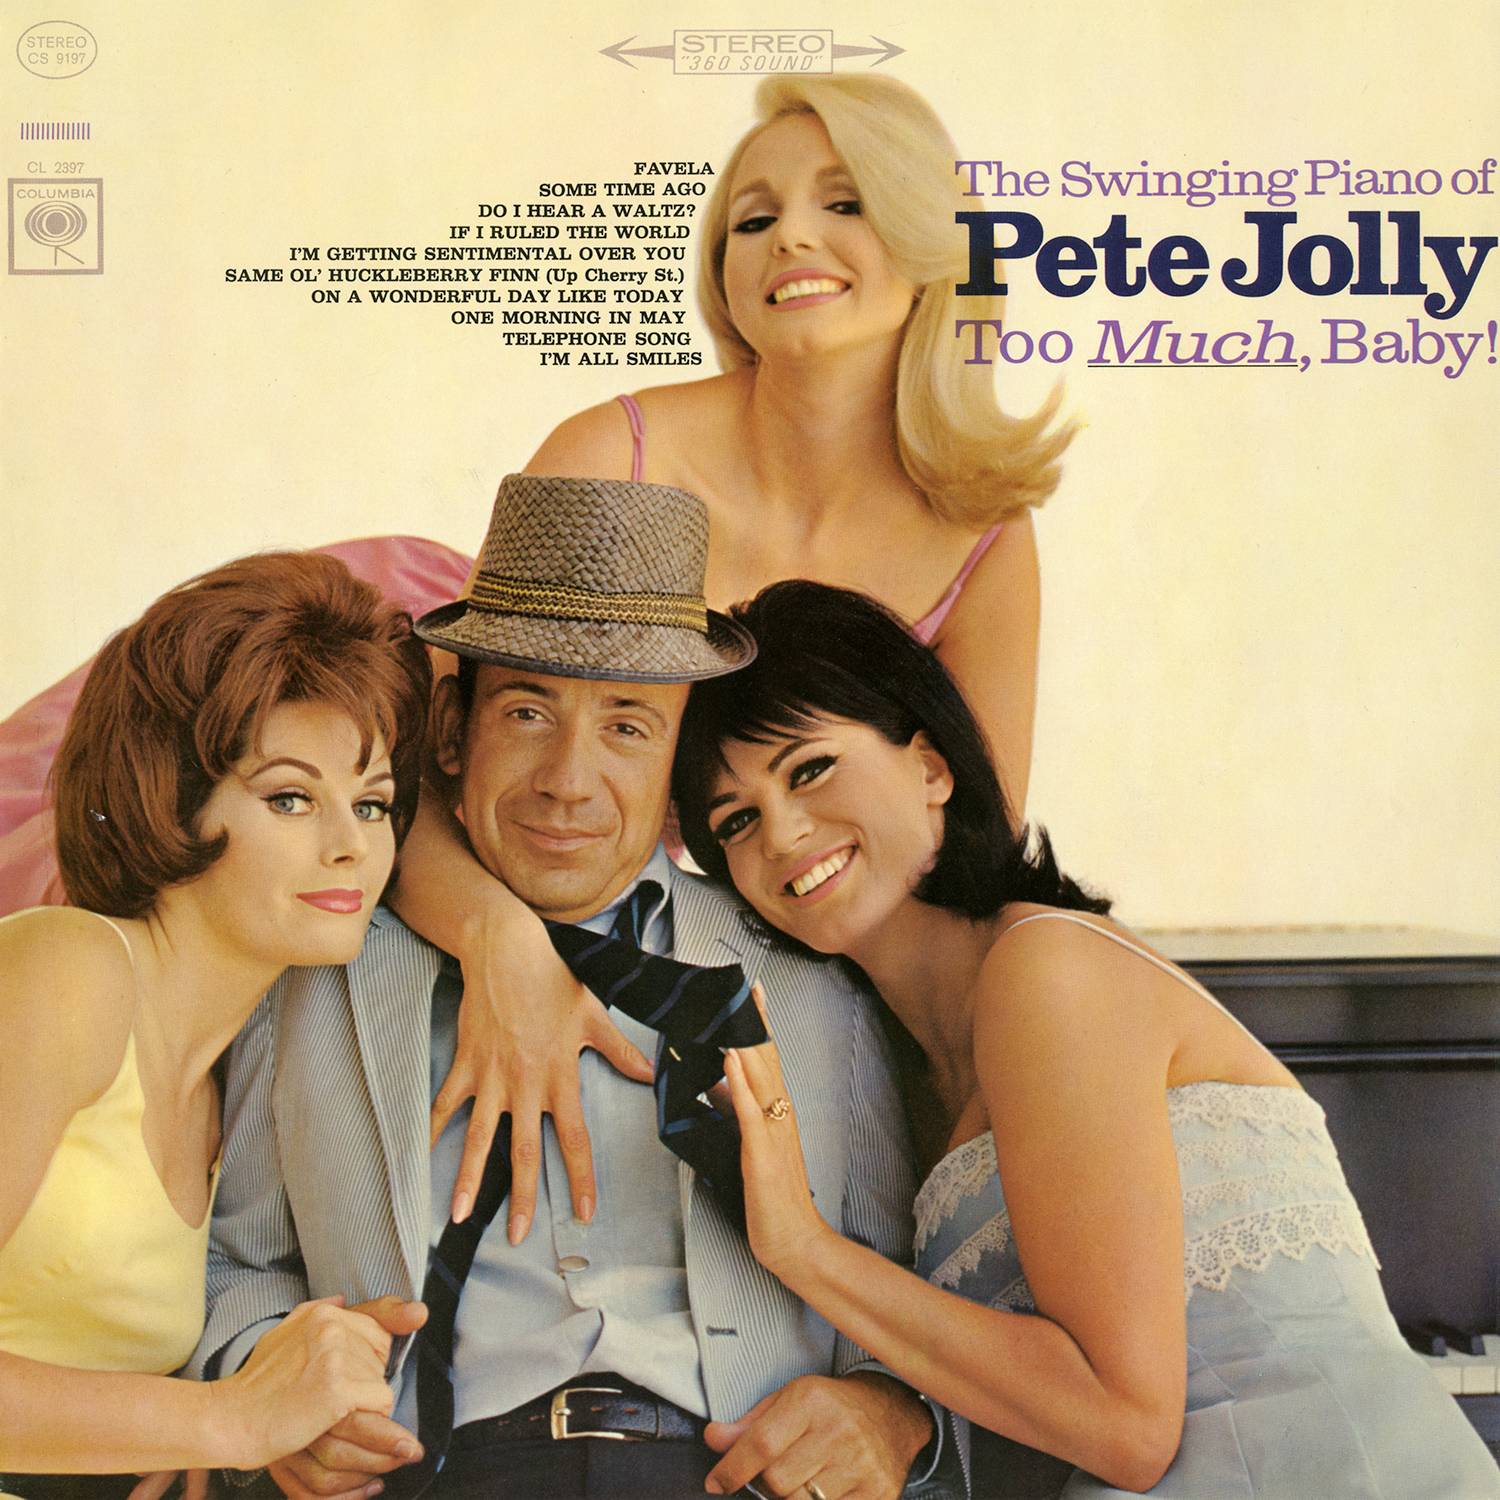 Pete Jolly - Too Much, Baby! (1965/2015) [AcousticSounds FLAC 24bit/96kHz]